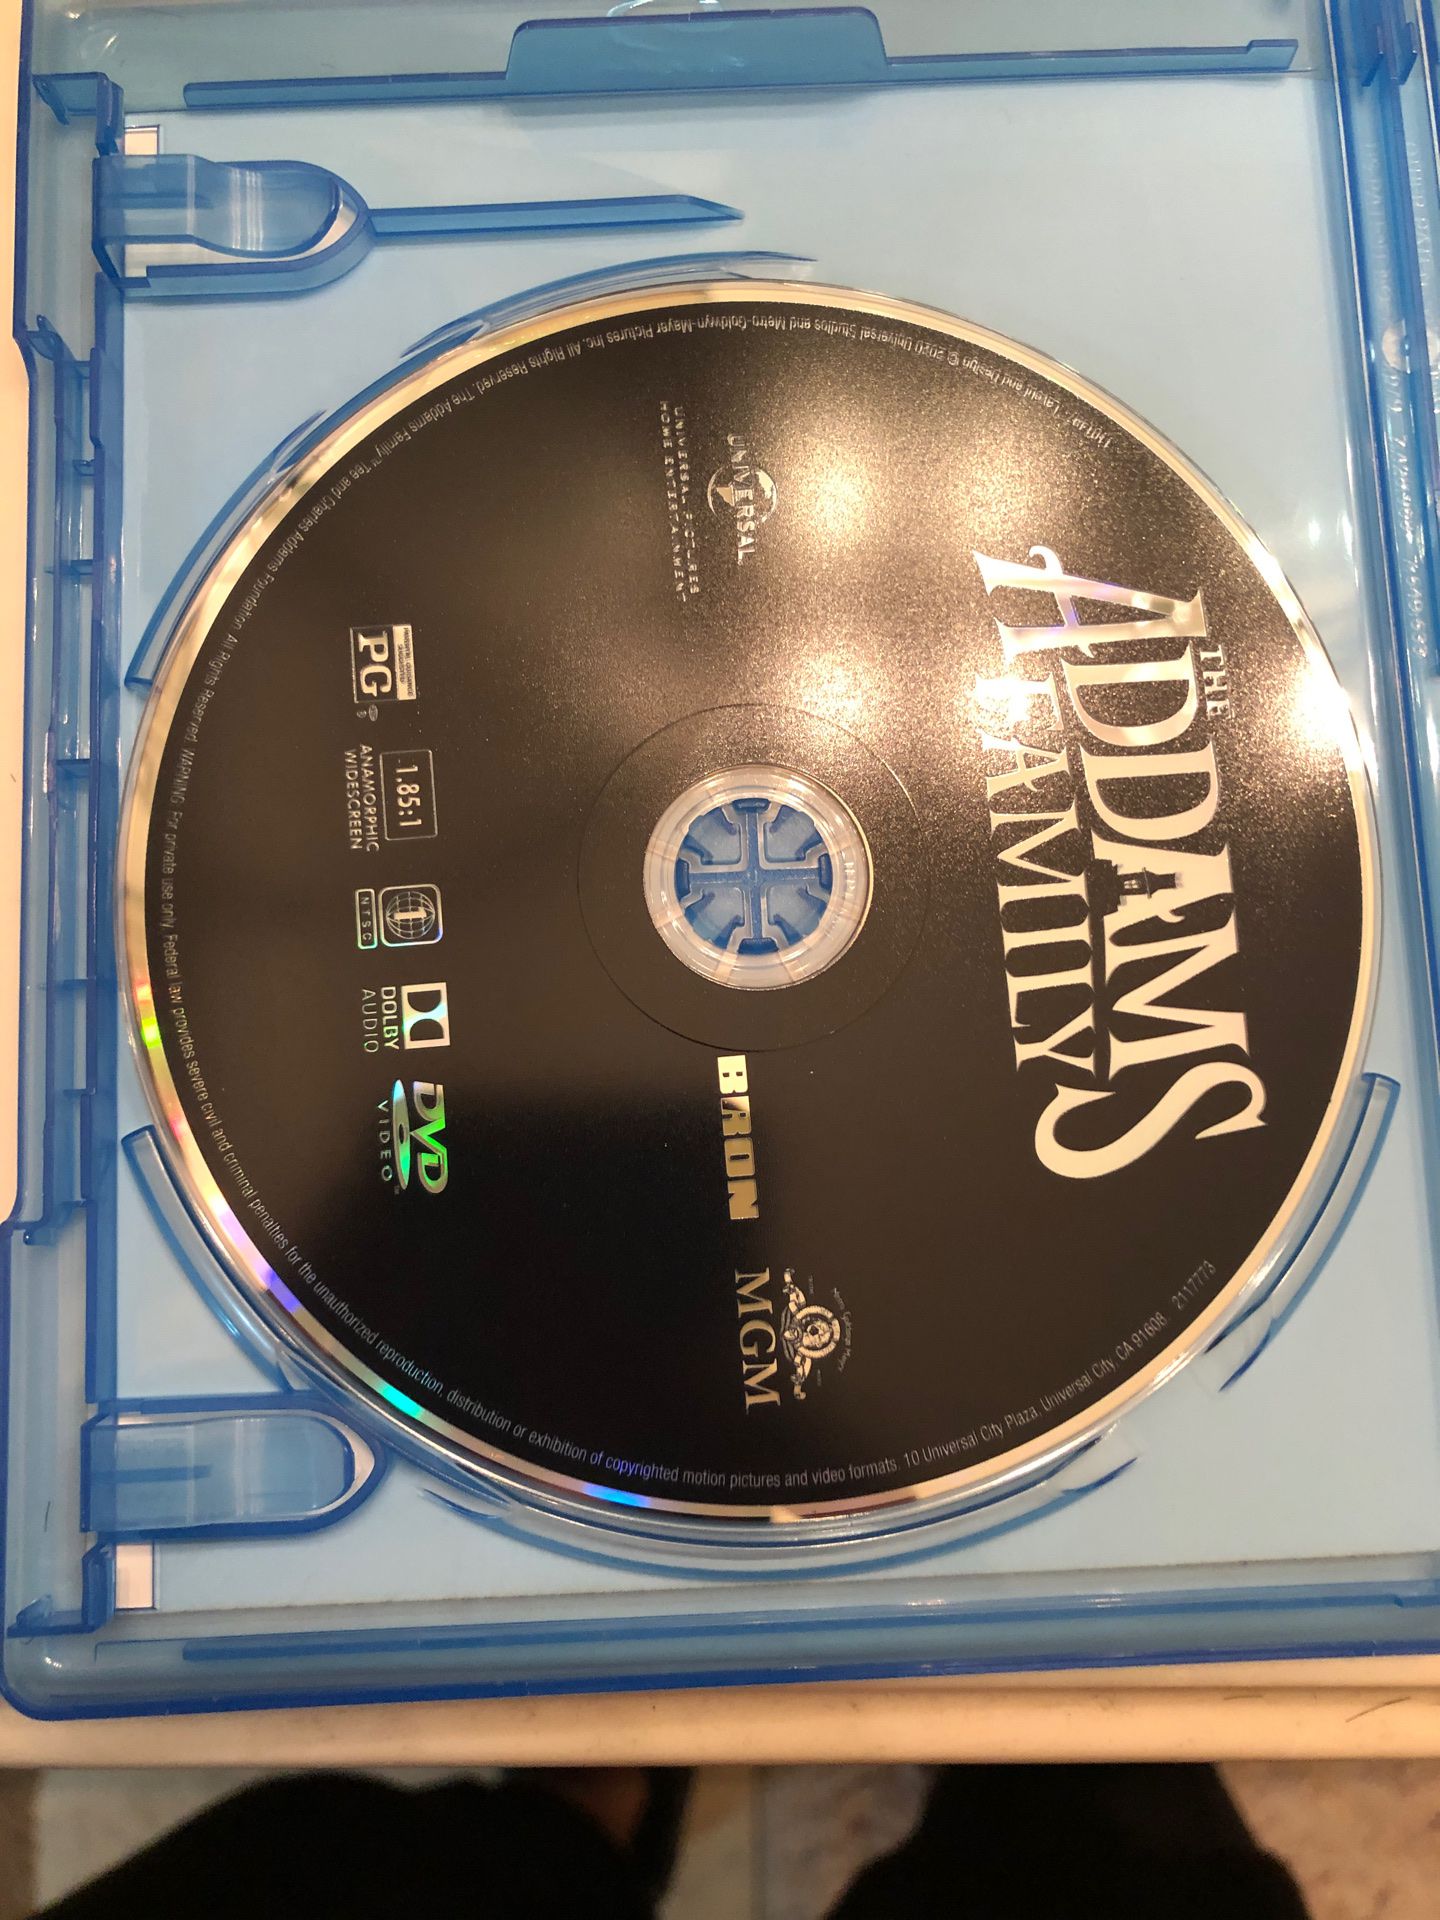 Adams family movie DVD only